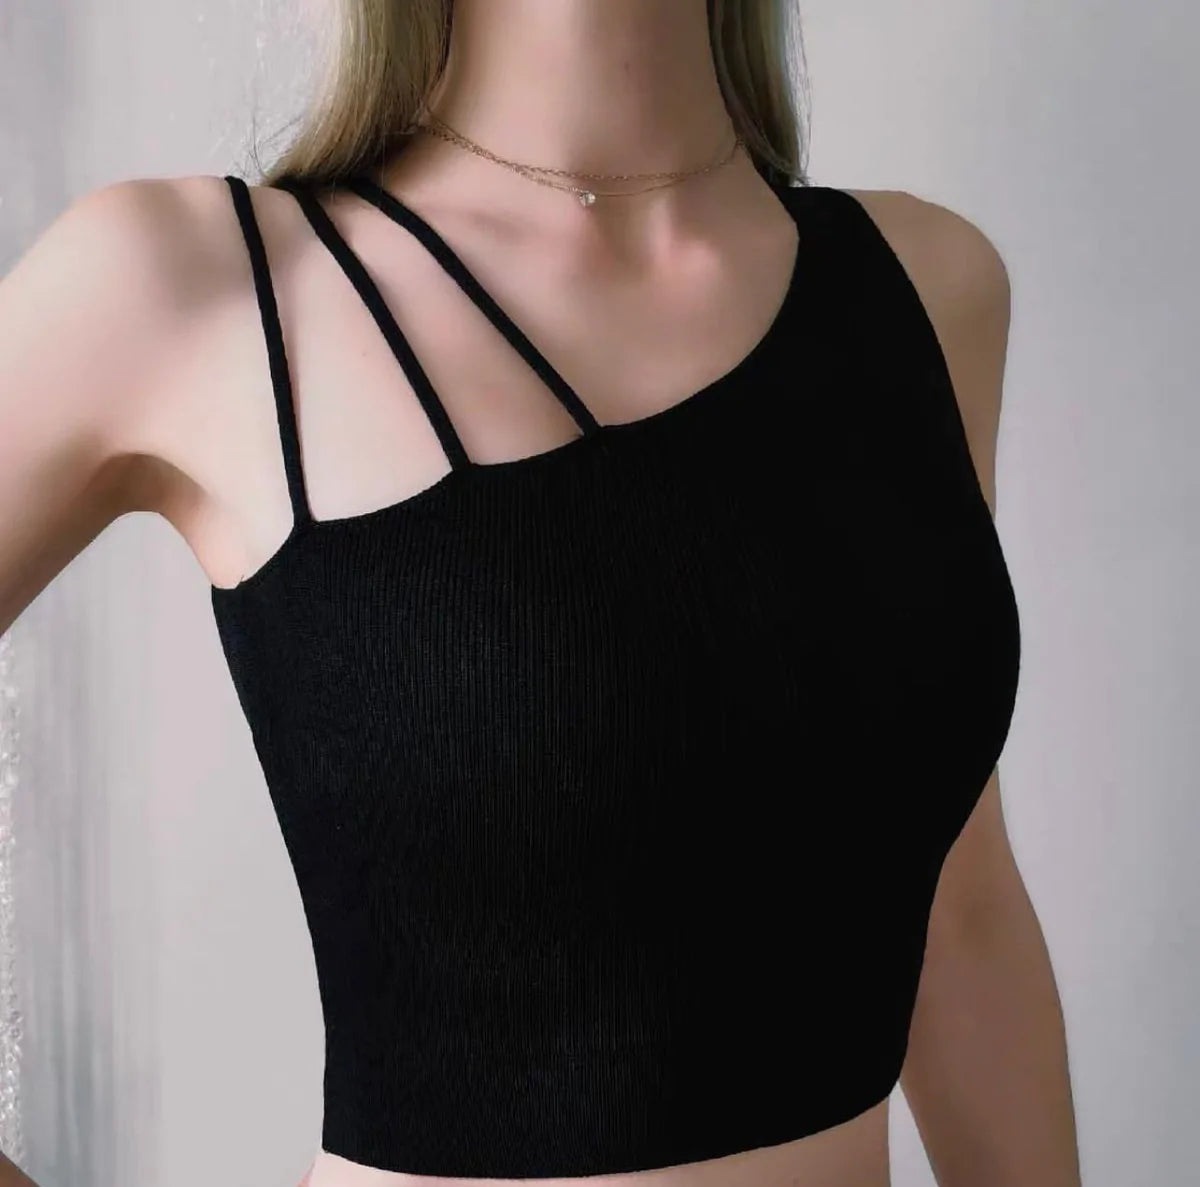 PACK OF 3 TRIPLE STRAPS TOGA CROP TOPS CH # 312